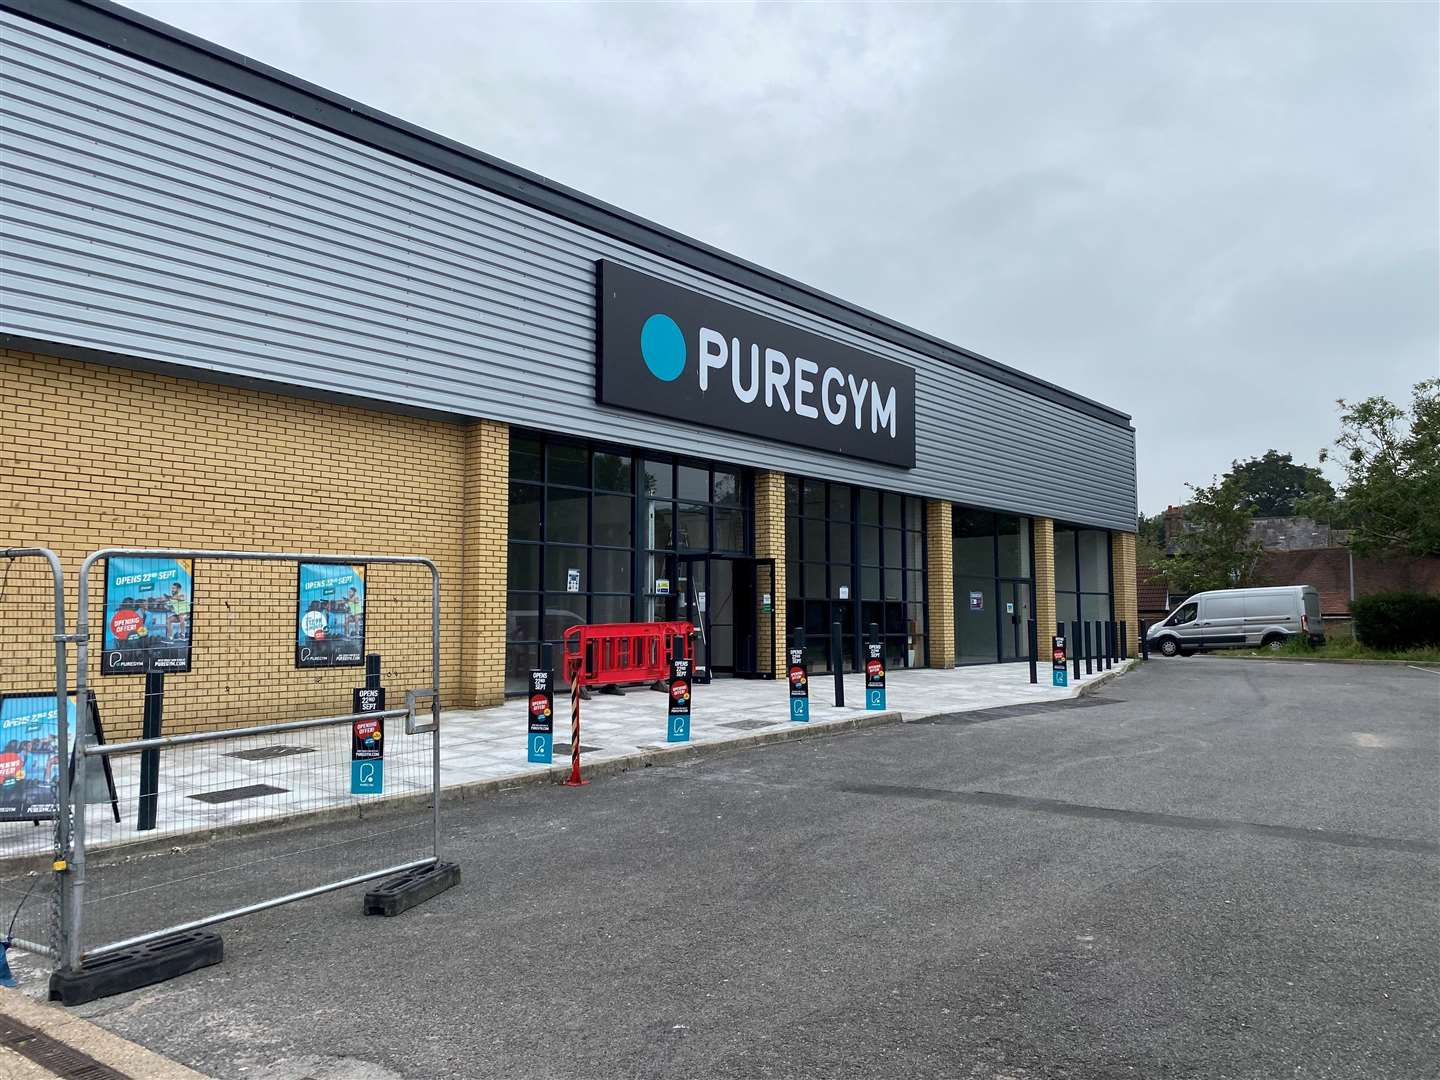 It is the first PureGym to open in Dover